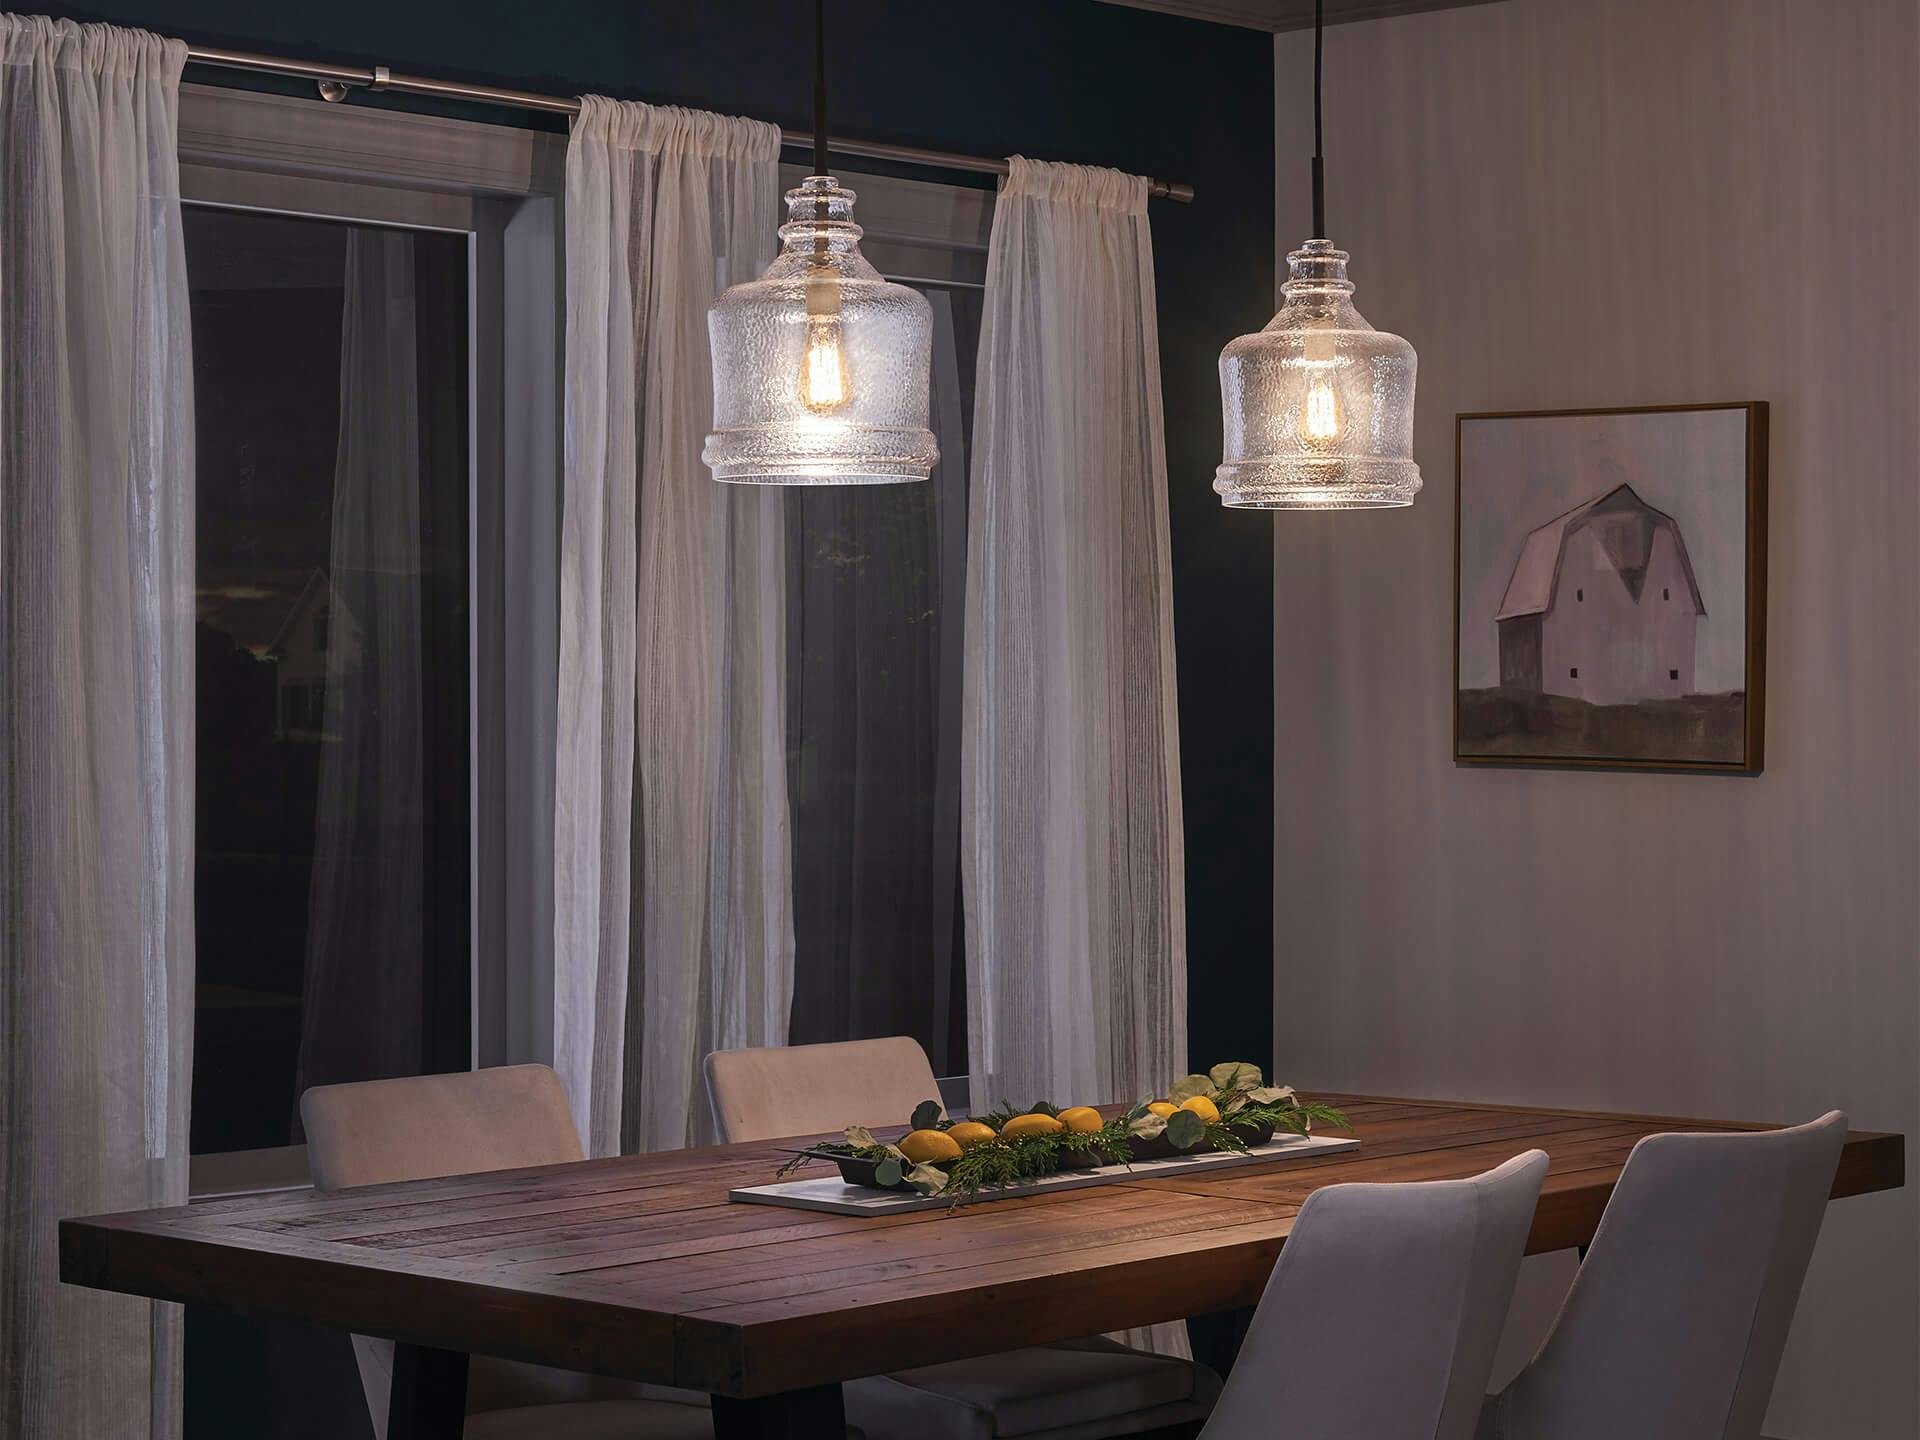 Dining room with two pendant lights hanging above a long table